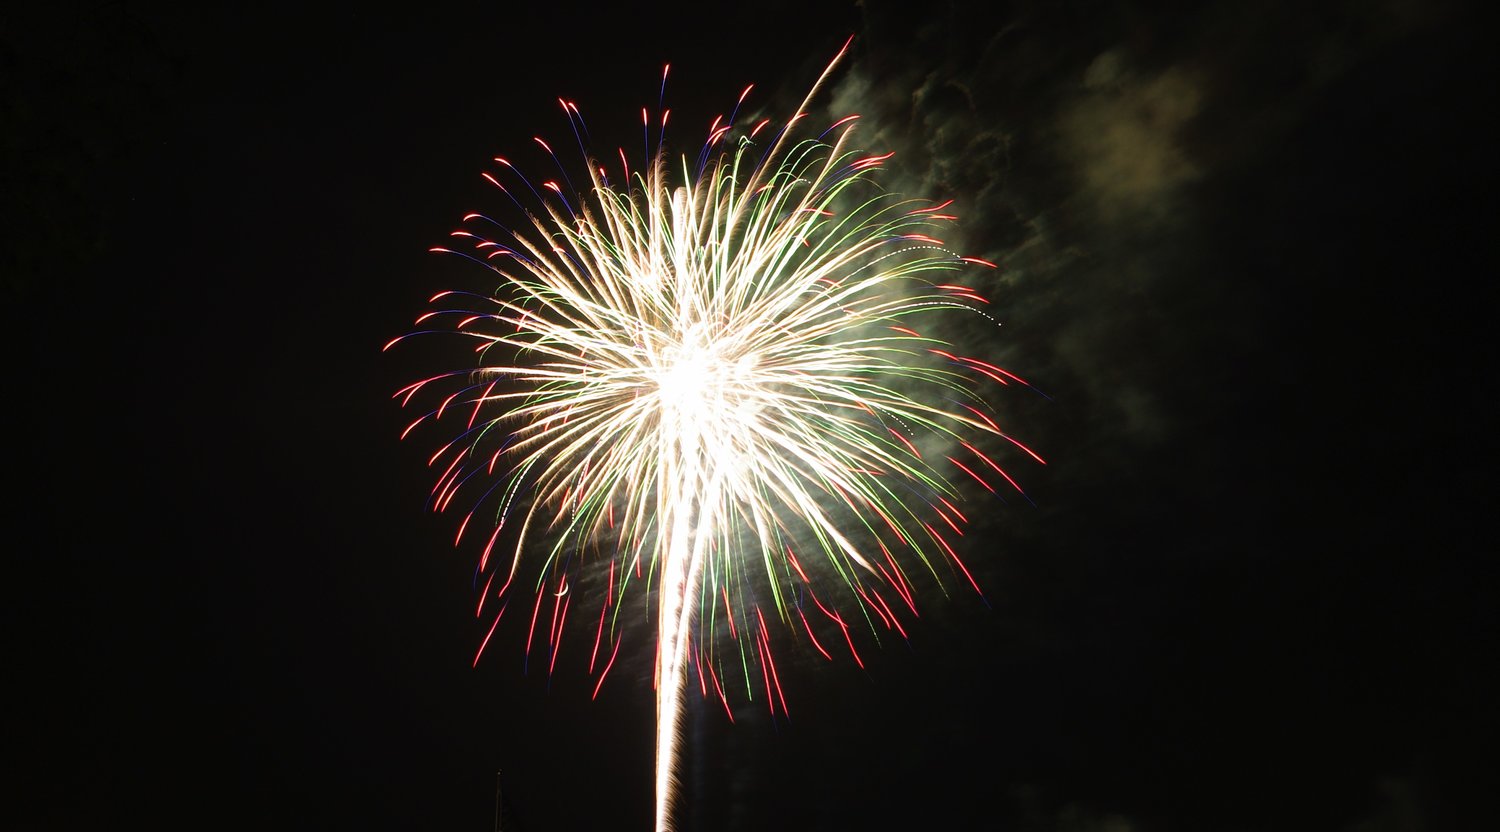 Fireworks explode during a display in Baldwin County. The Spanish Fort City Council has discussed city regulations that allow shooting fireworks on holidays such as New Year's Even and July 4.